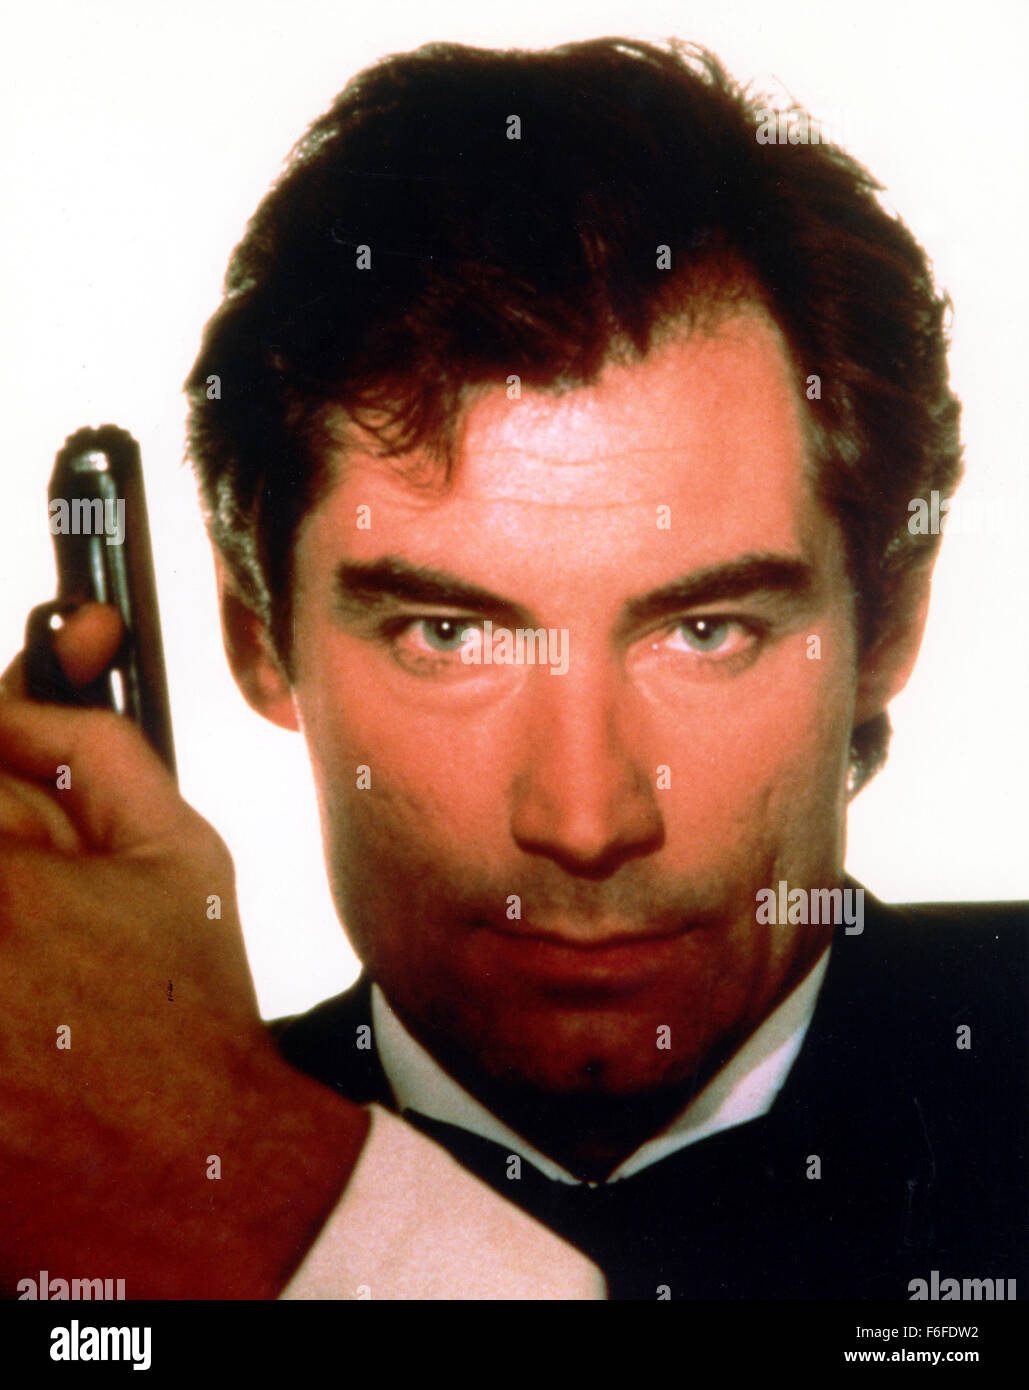 RELEASE DATE: June 29, 1987. Film Title: The Living Daylights. STUDIO: 20th Century Fox. PLOT: James Bond finds himself helping a Soviet general escape from the Iron Curtain only to see a cellist holding a rifle on his subject. When the general is recaptured, Bond decides to track him by finding out why a concert cello player would try and kill her benefactor. He escapes with her first to Vienna, then to Morocco, finally ending up in a prison in Soviet occupied Afghanistan as he tracks down the elements in this mystery. PICTURED: TIMOTHY DALTON as James Bond. Stock Photo